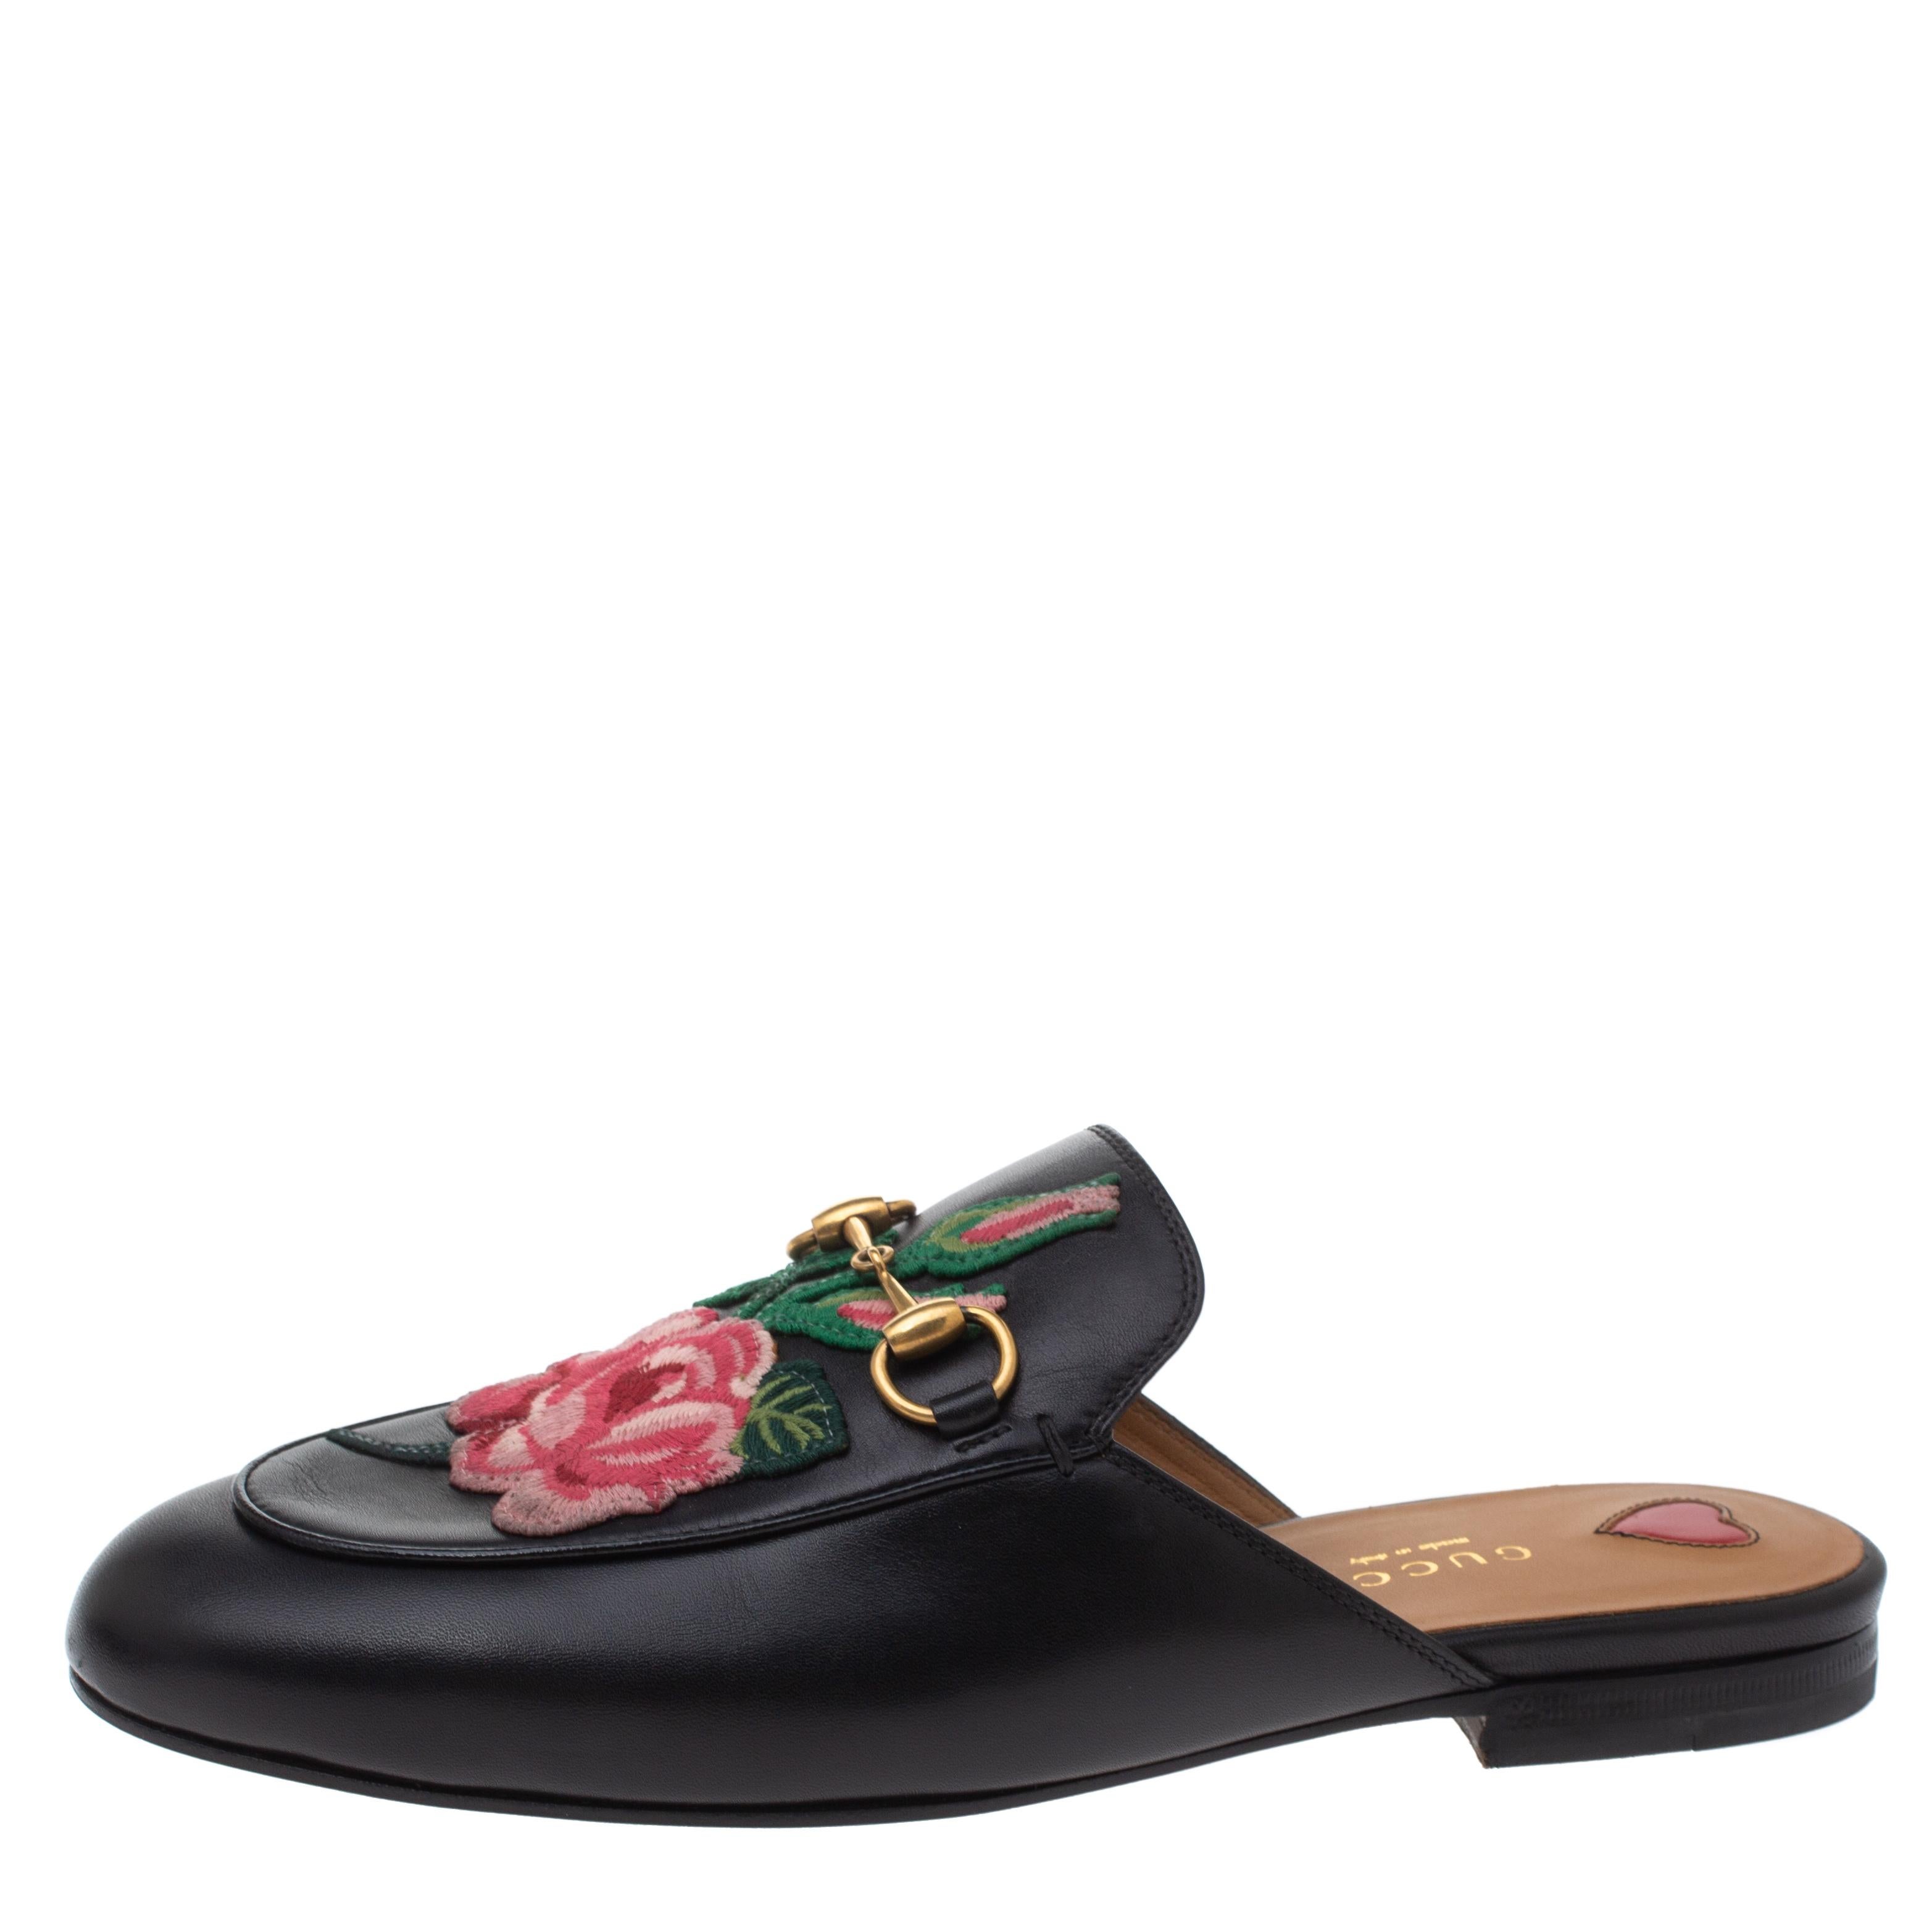 These Gucci Princetown mules are a fresh update on the perennially chic Gucci Horsebit loafers. These shoes are enhanced by a gold-tone Horsebit detail that has defined the Gucci collection since the very beginning. Featuring a flower-embroidered